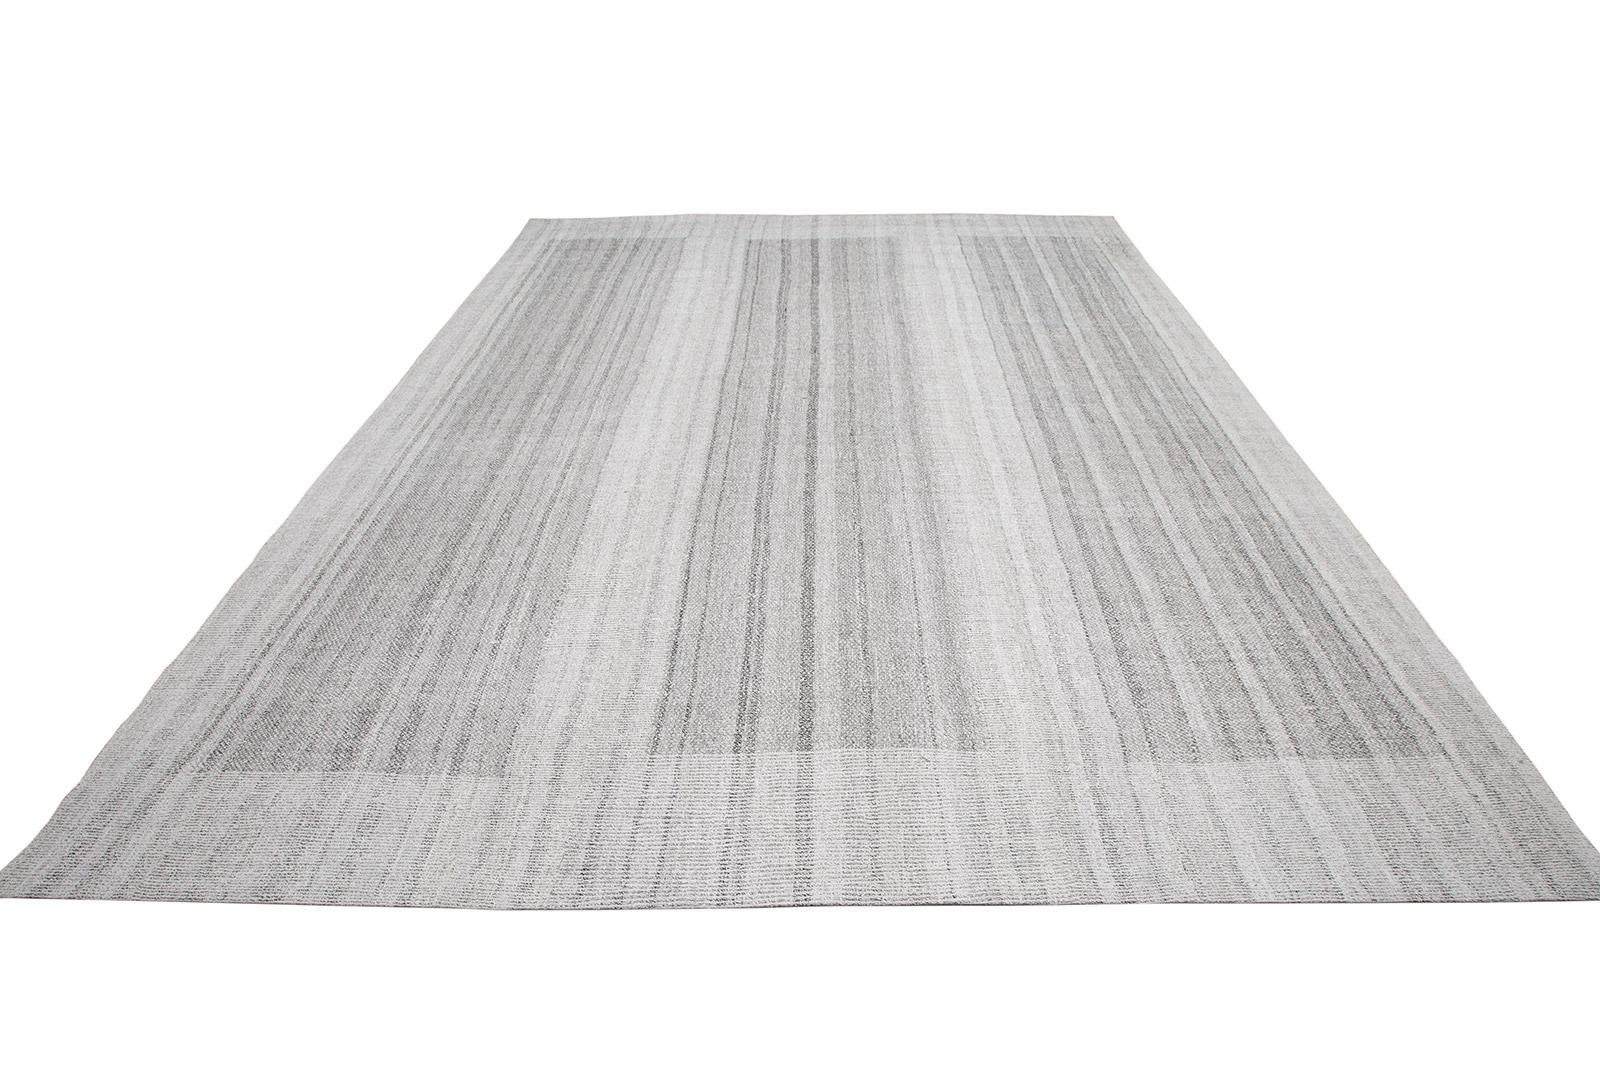 Afghan Unique Modern Handwoven Flat-Weave Textured Rug in Shades of Grey For Sale